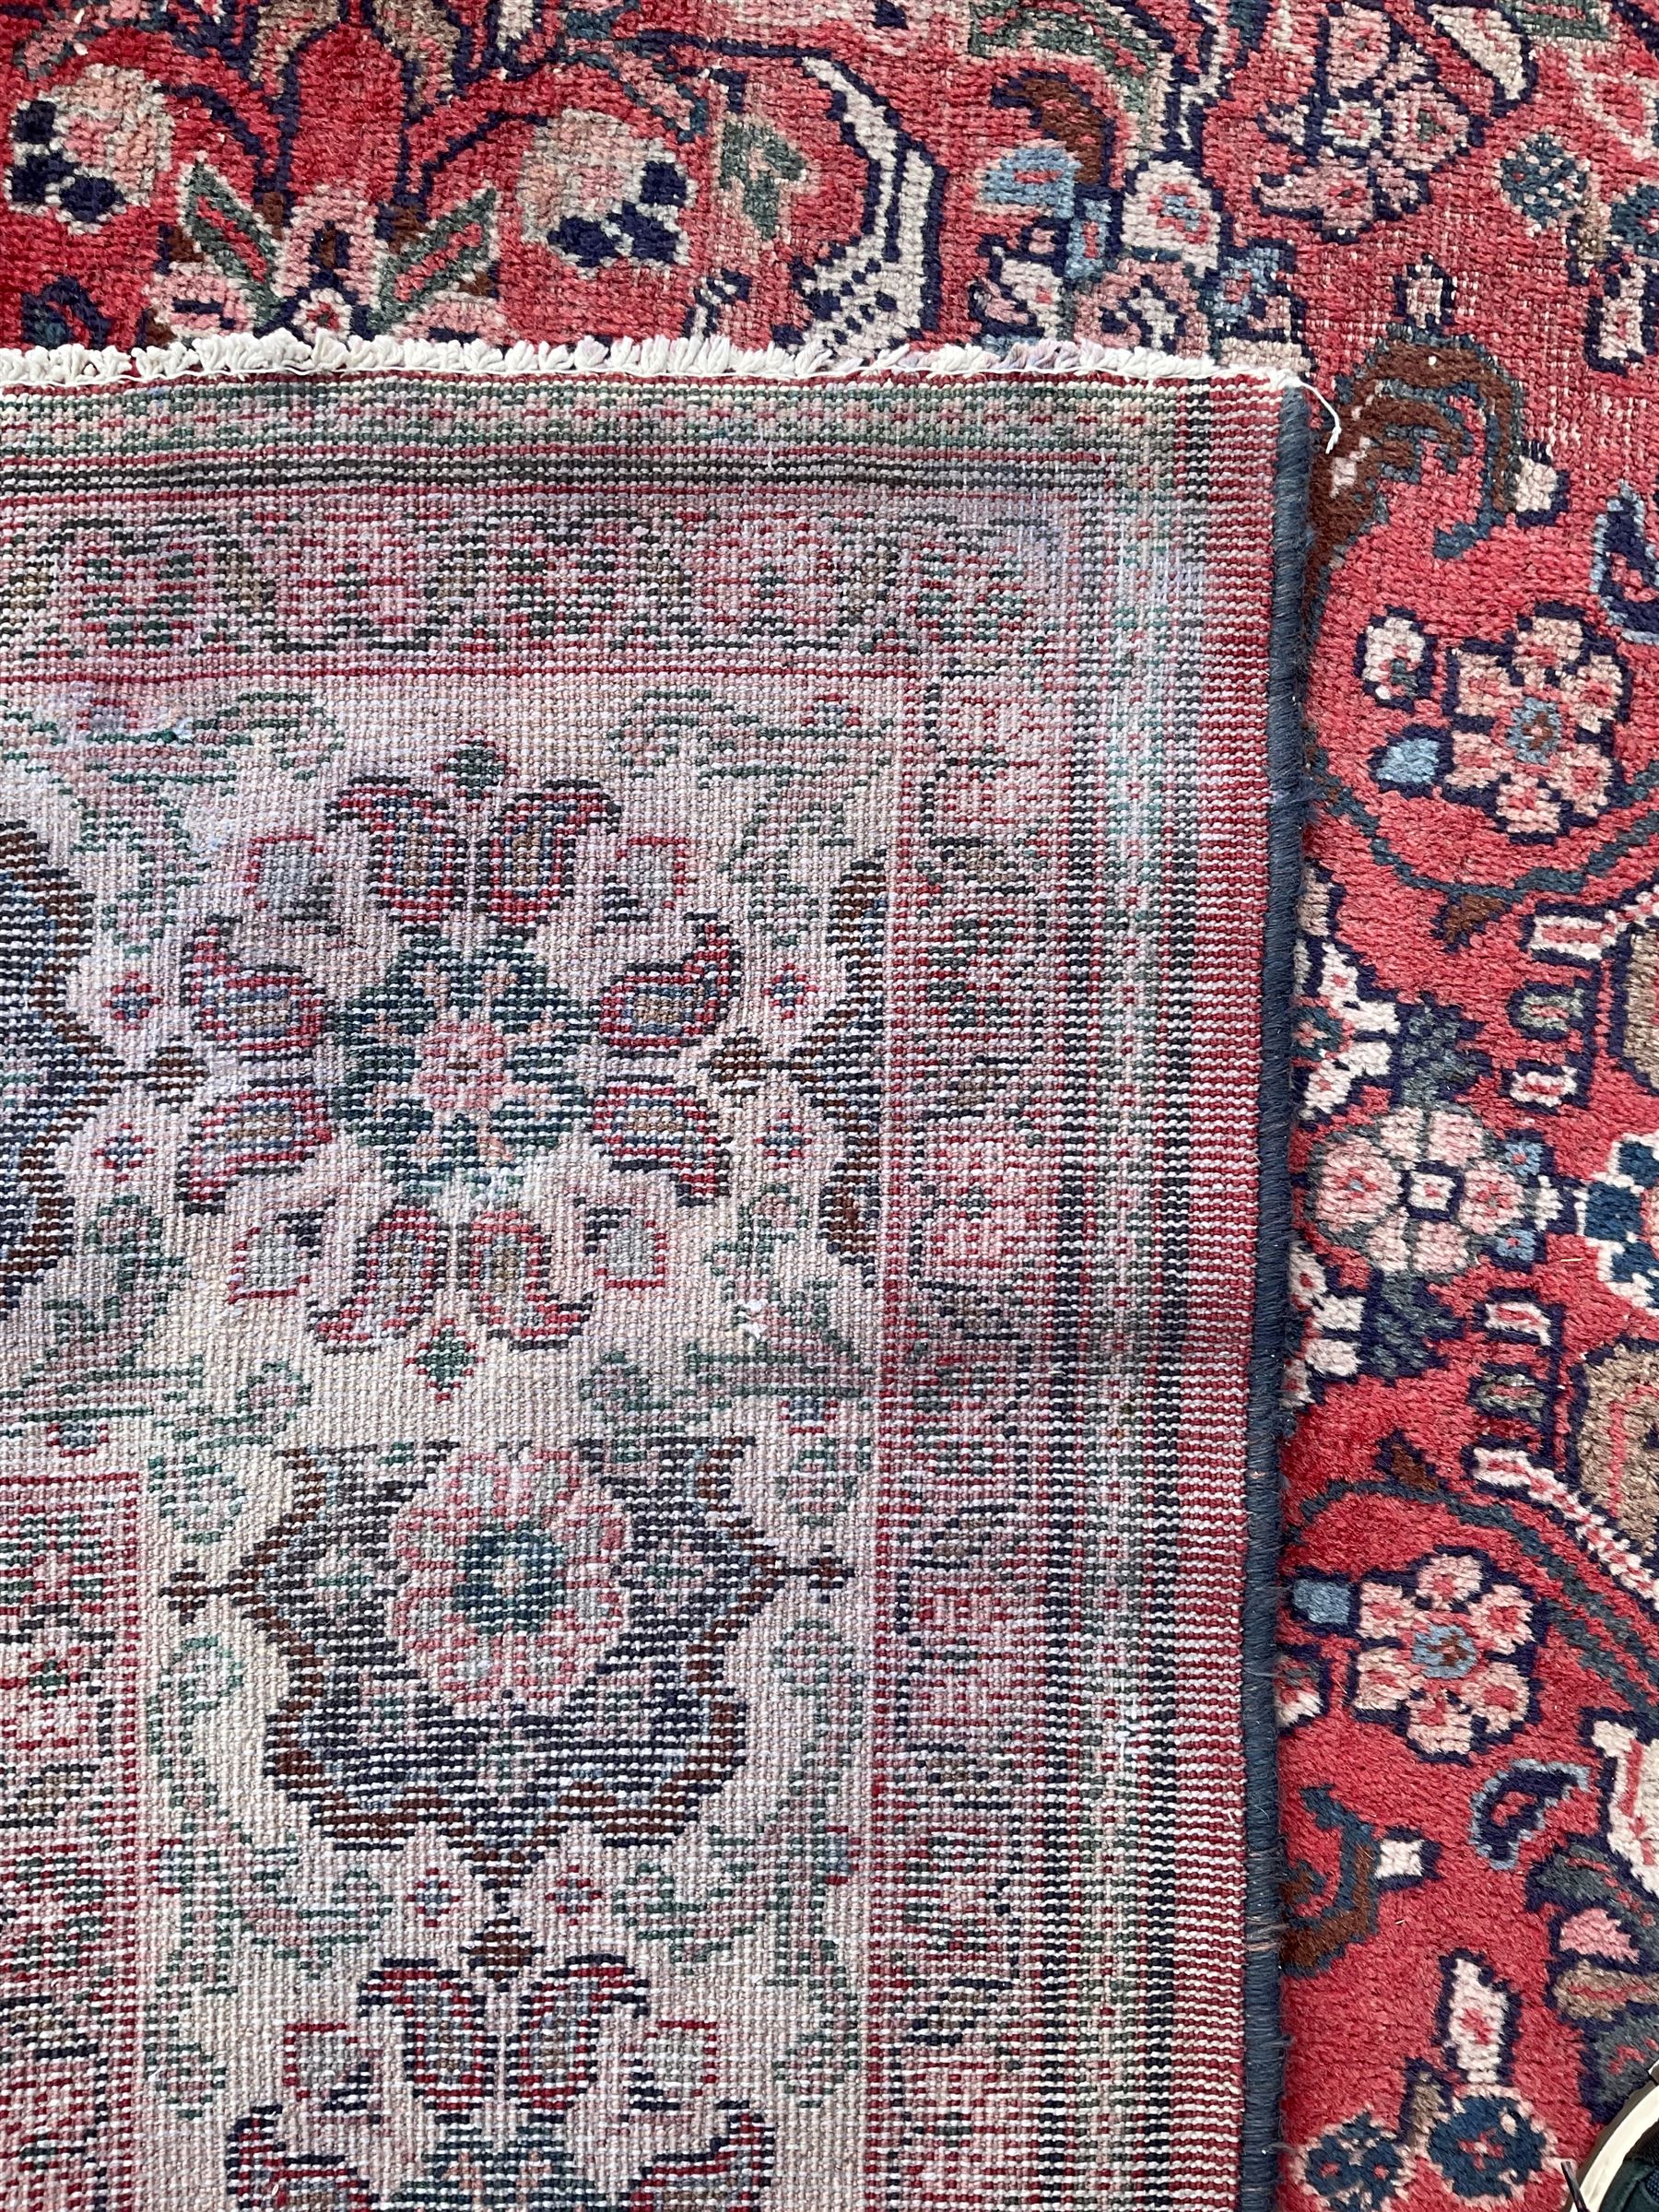 Persian red ground carpet - Image 6 of 6